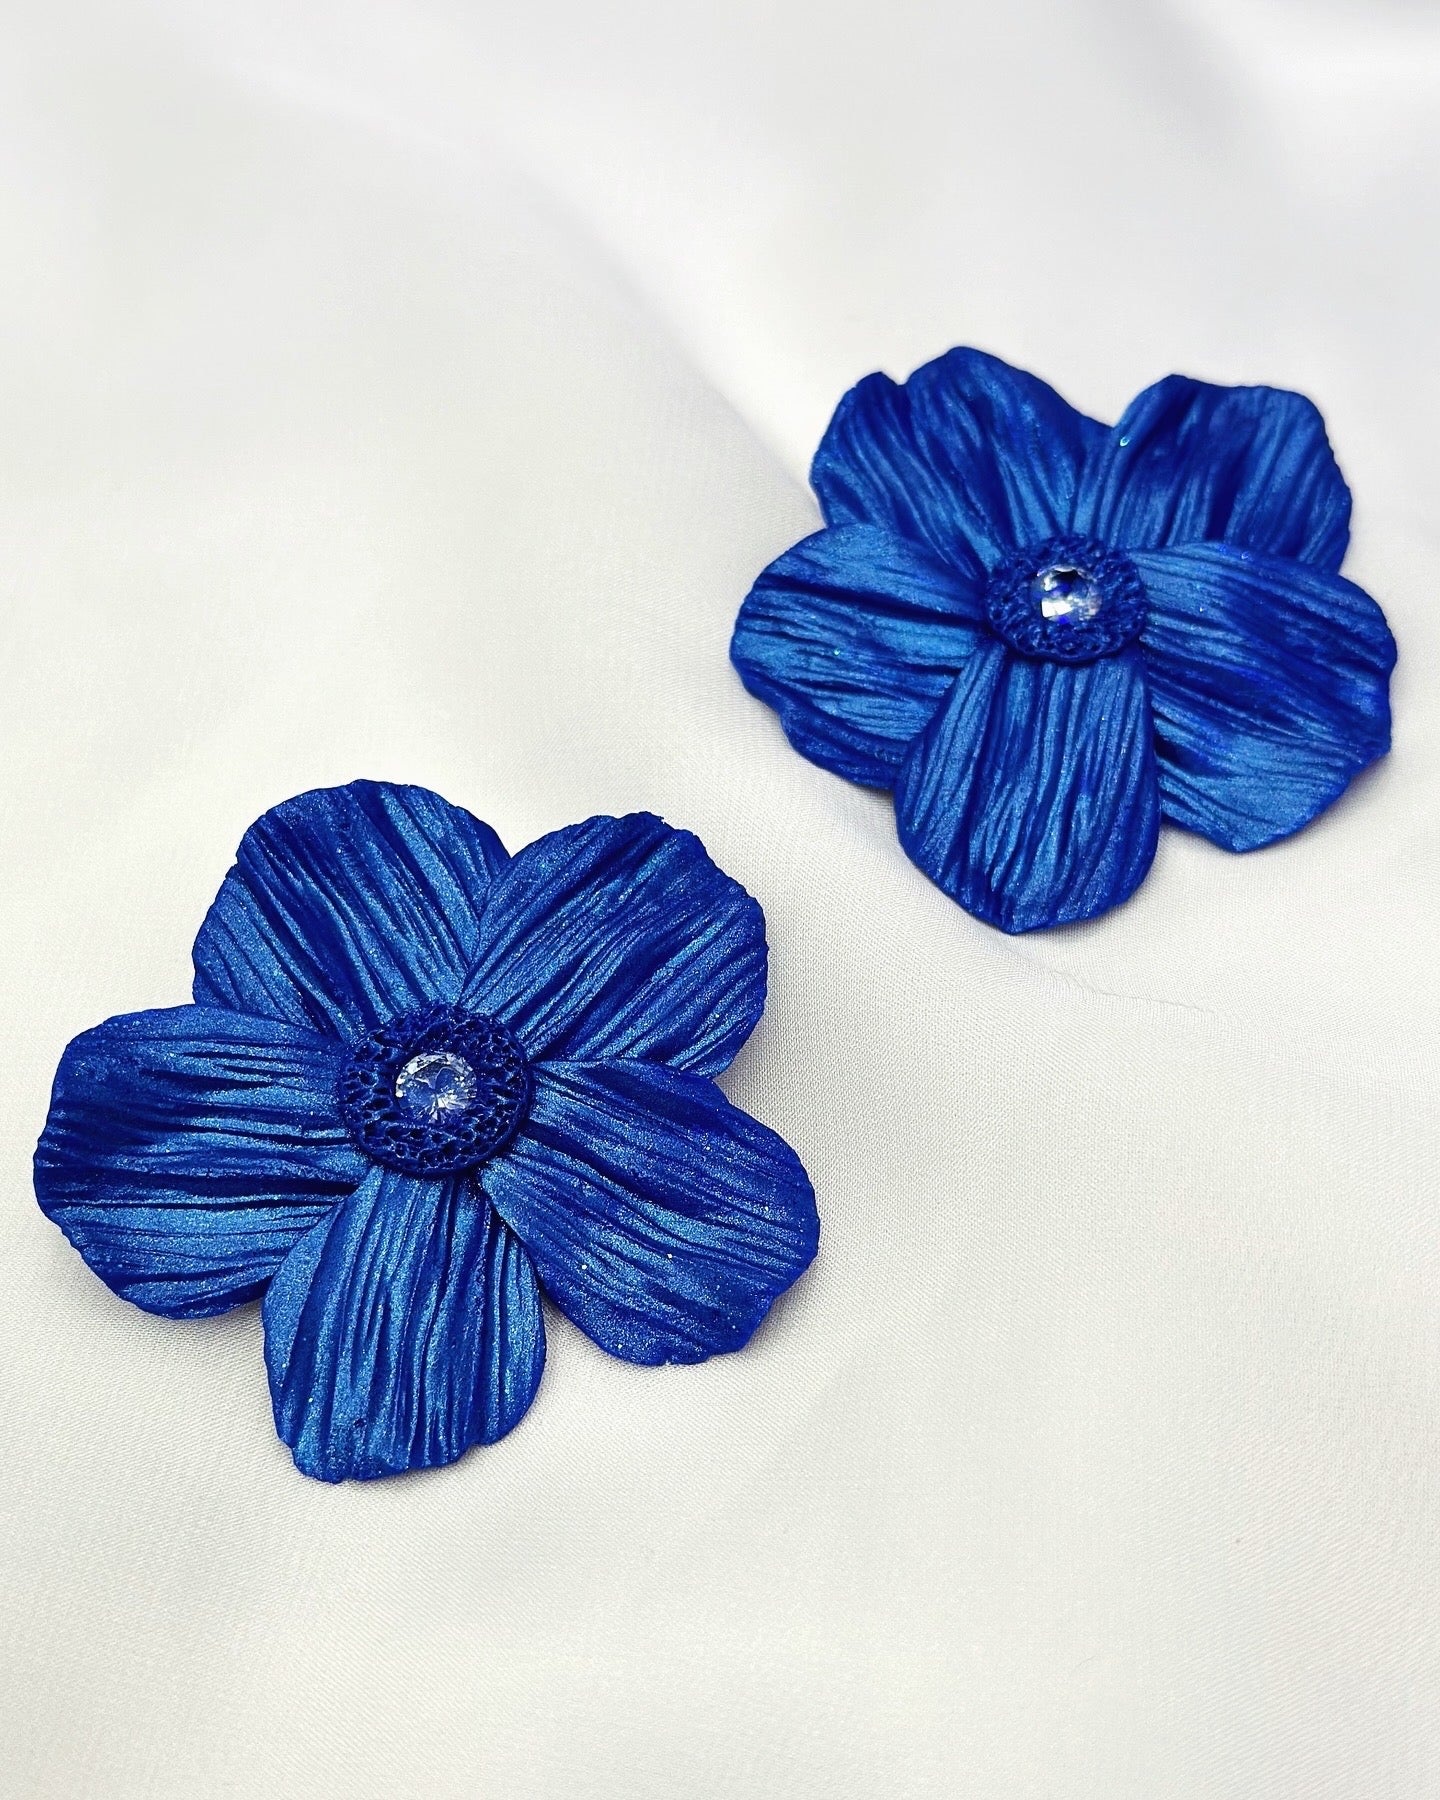 Big Statement Floral earrings with Zircon ✨